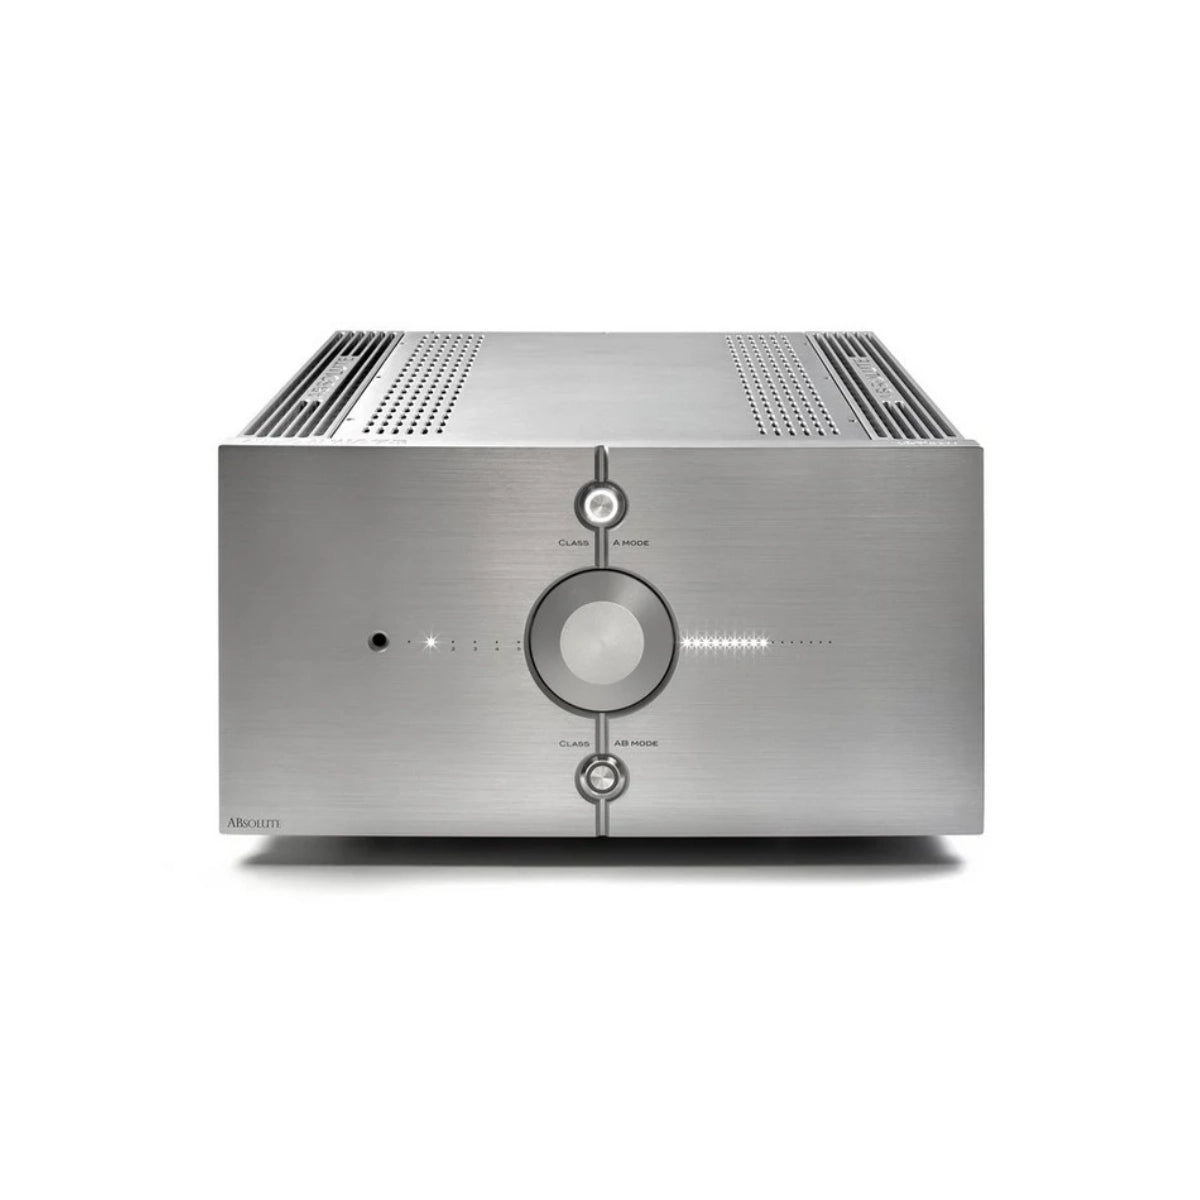 An image of Audio Analogue's Absolute 50w pure class-a integrated amplifier in silver finish, RR version.